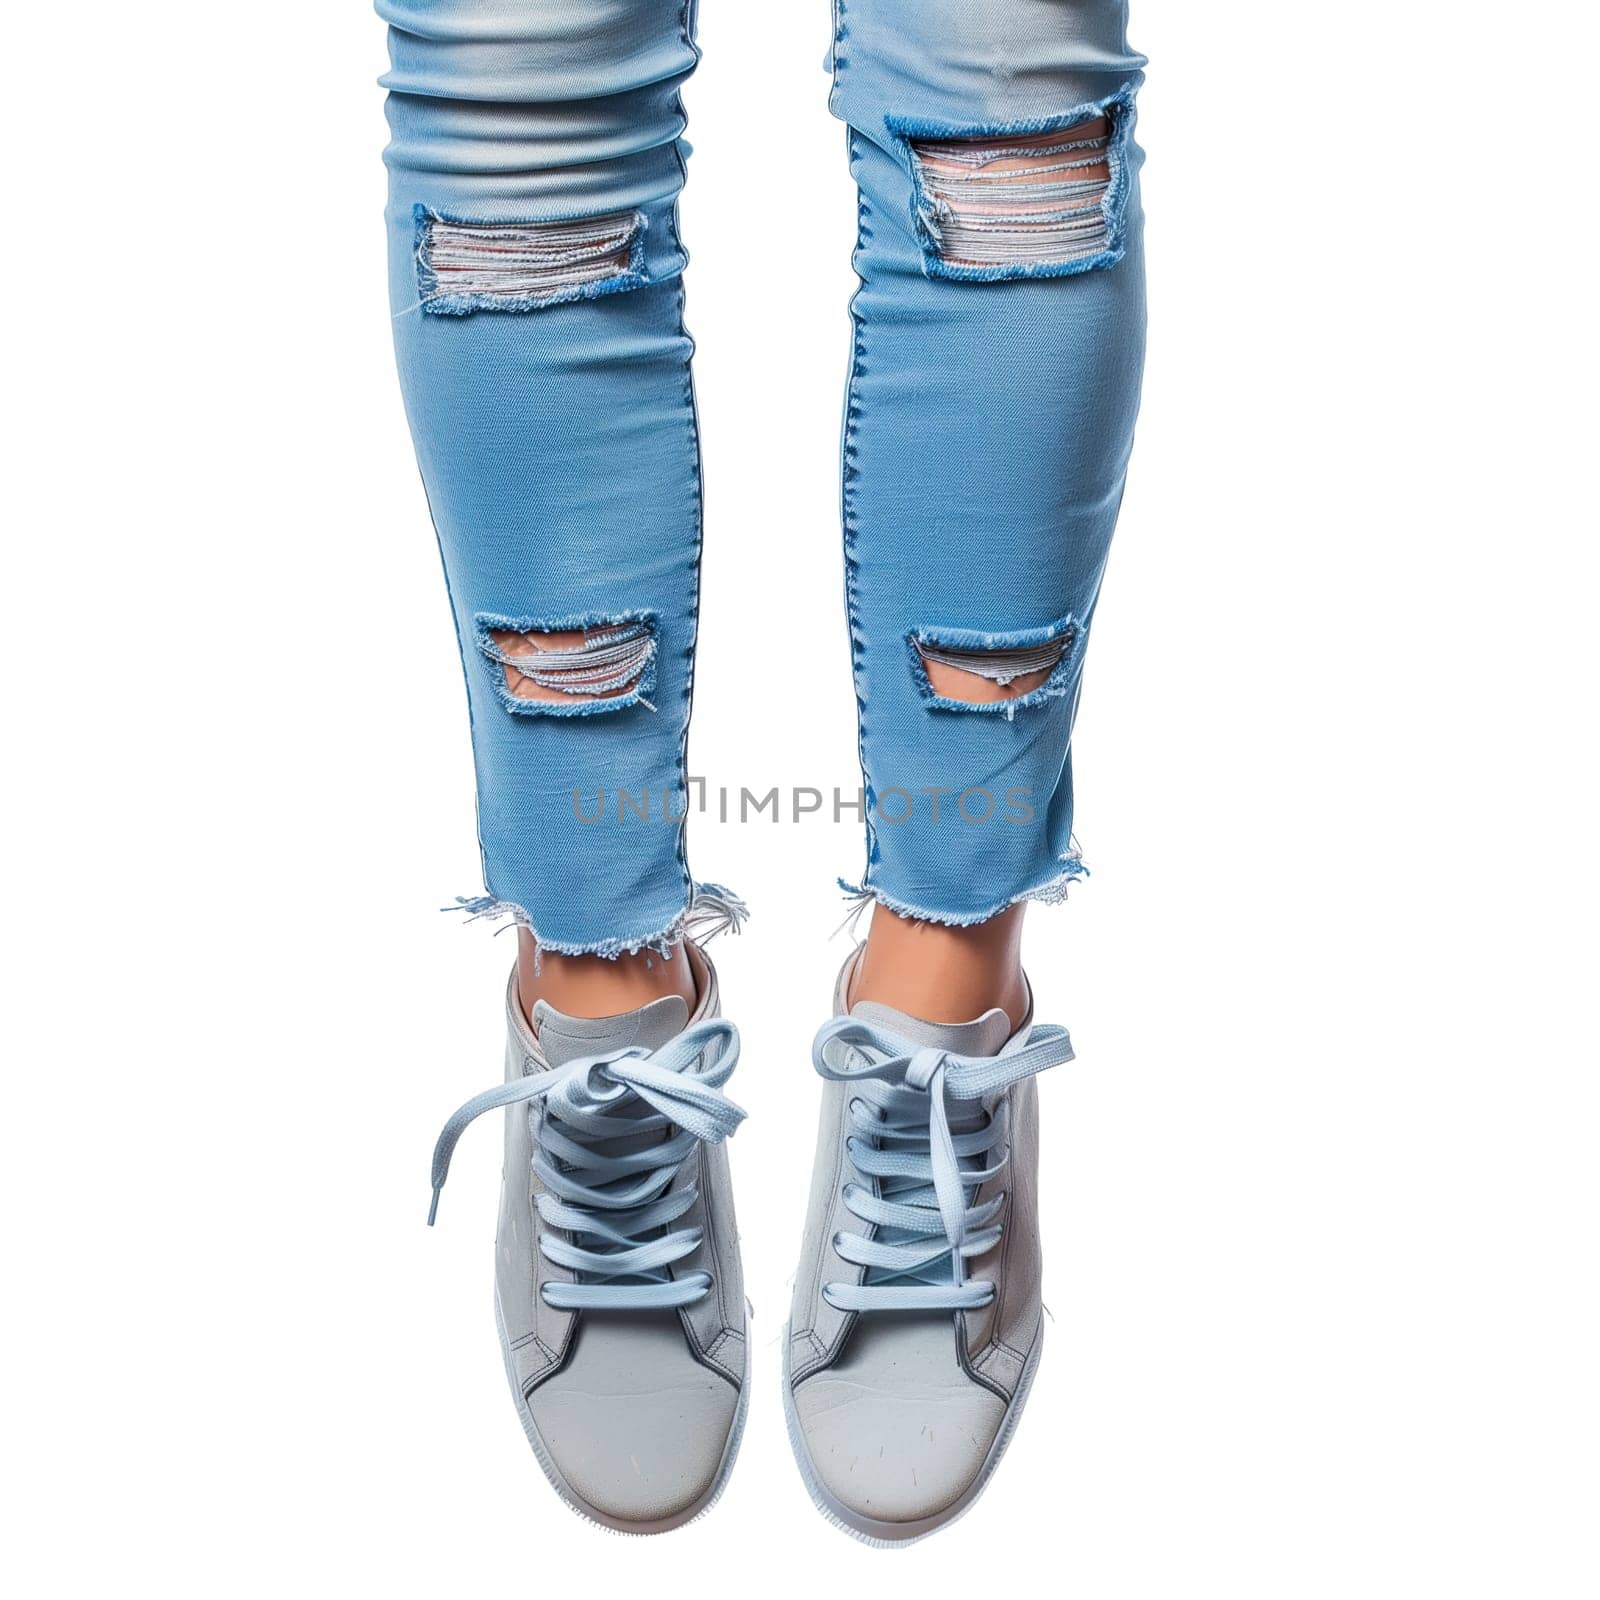 Female legs in jeans and sneakers by Dustick